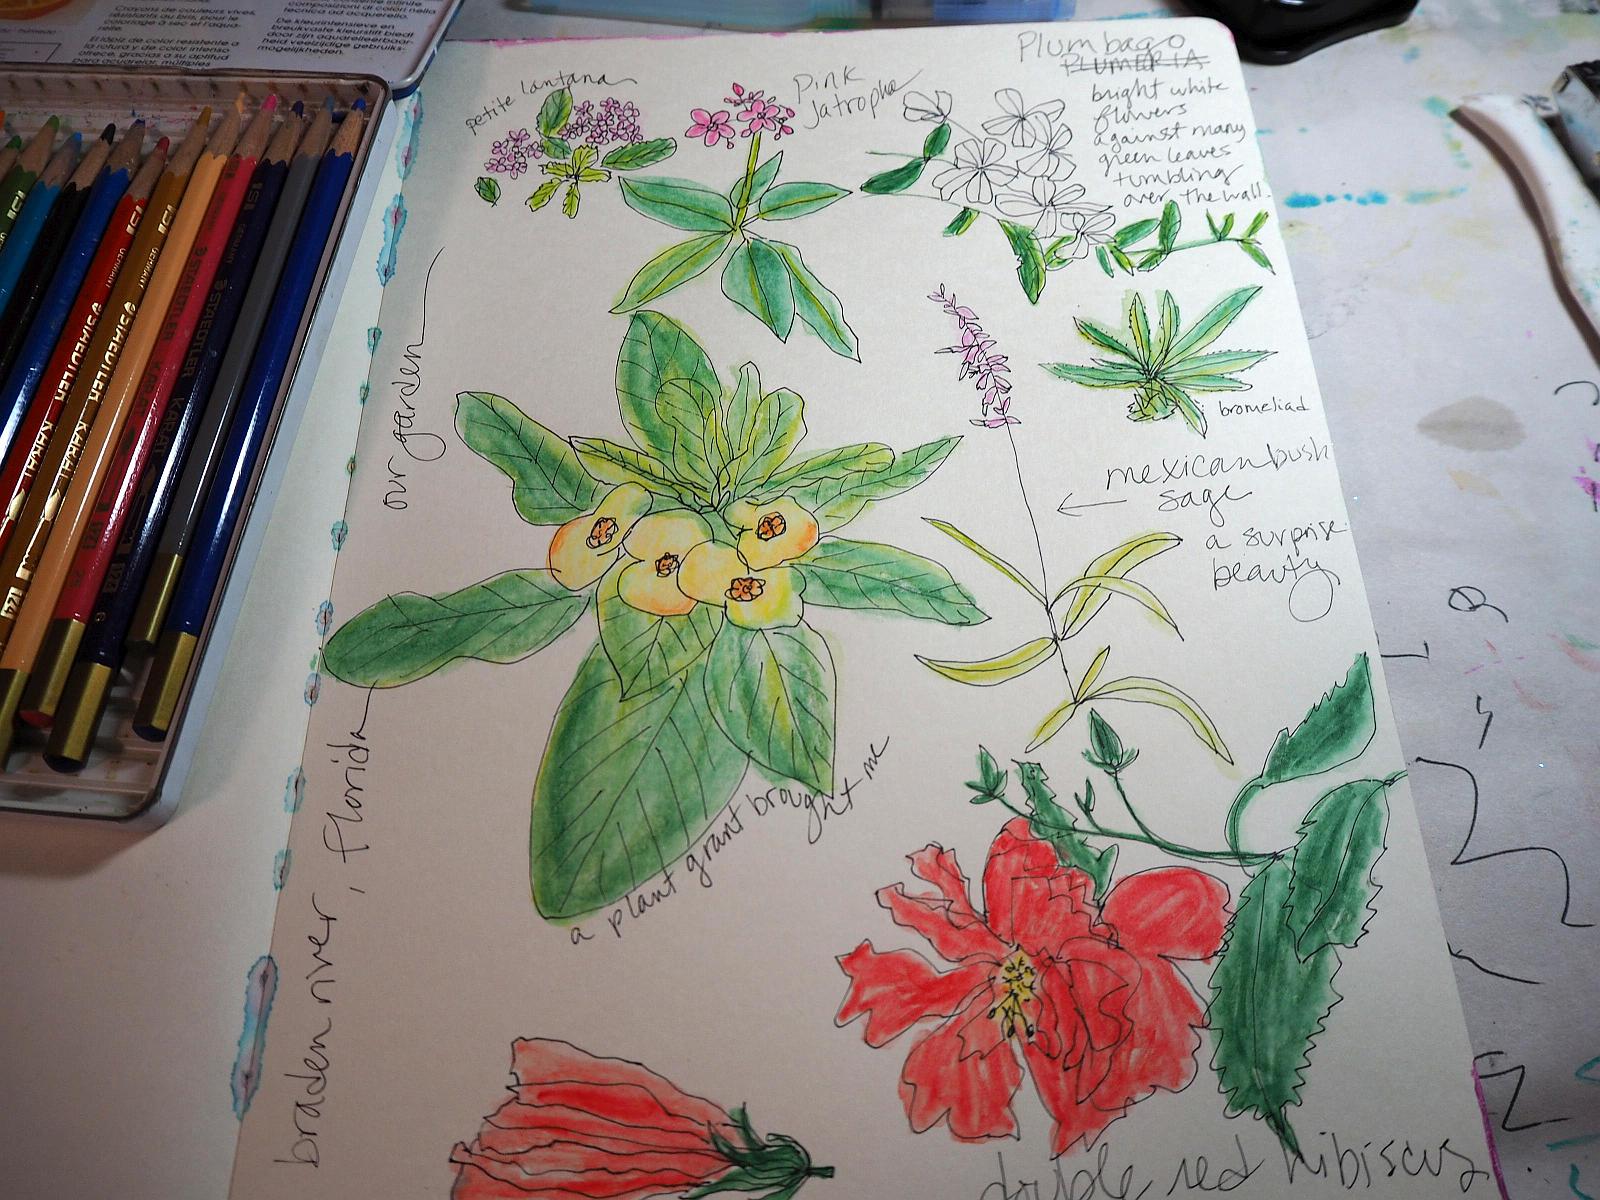 A nature journal featuring hand-drawn flowers, next to some colored pencils. (photo © Lenna Young Andrews via the Flickr Creative Commons)